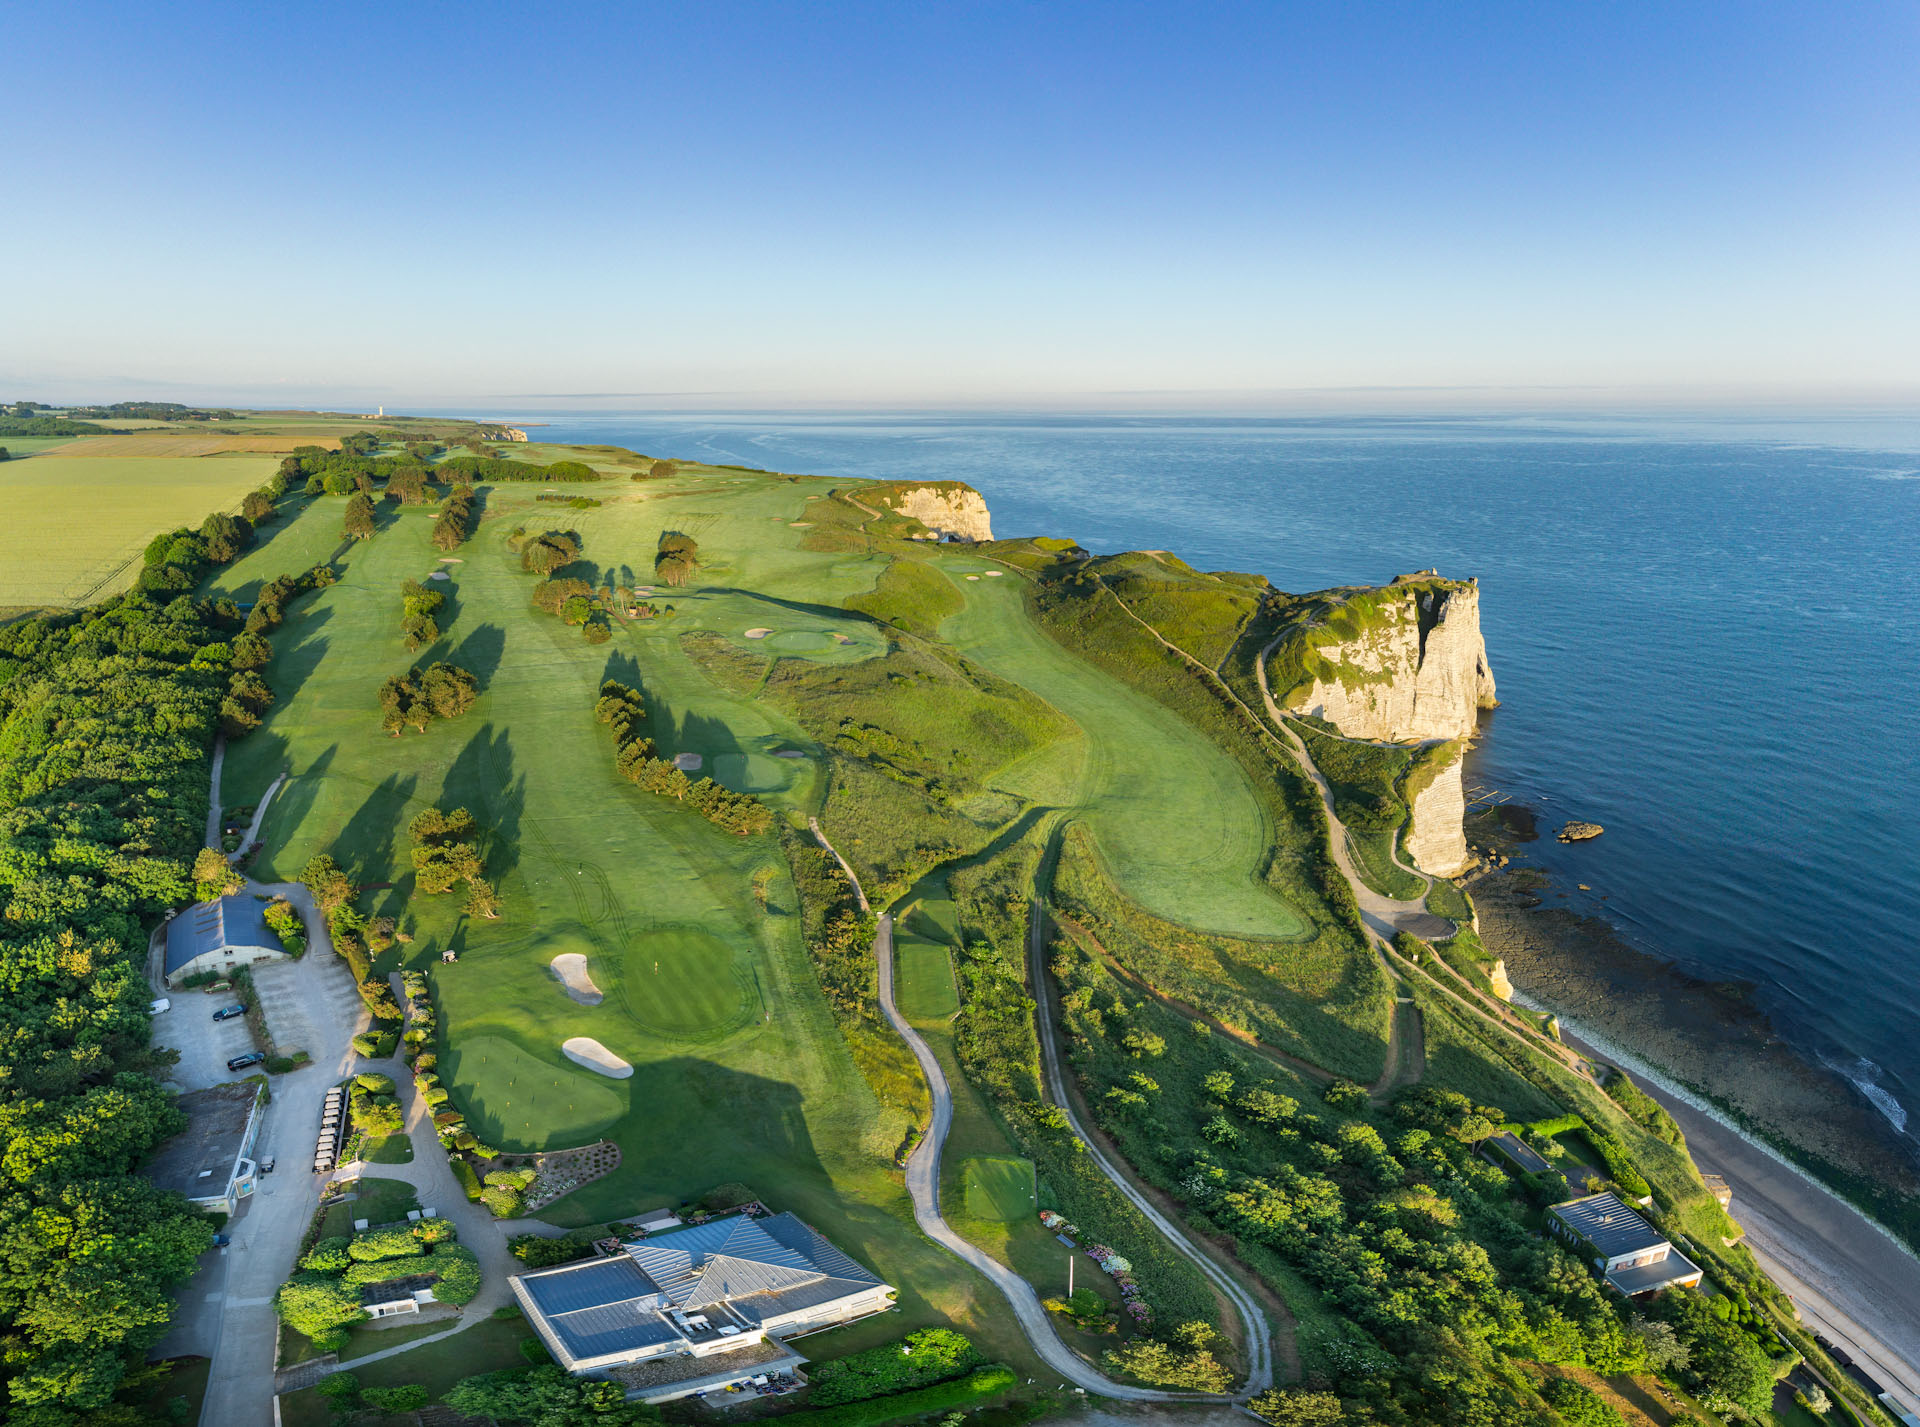 Overview of Etretat Golf Club, Normandy, France